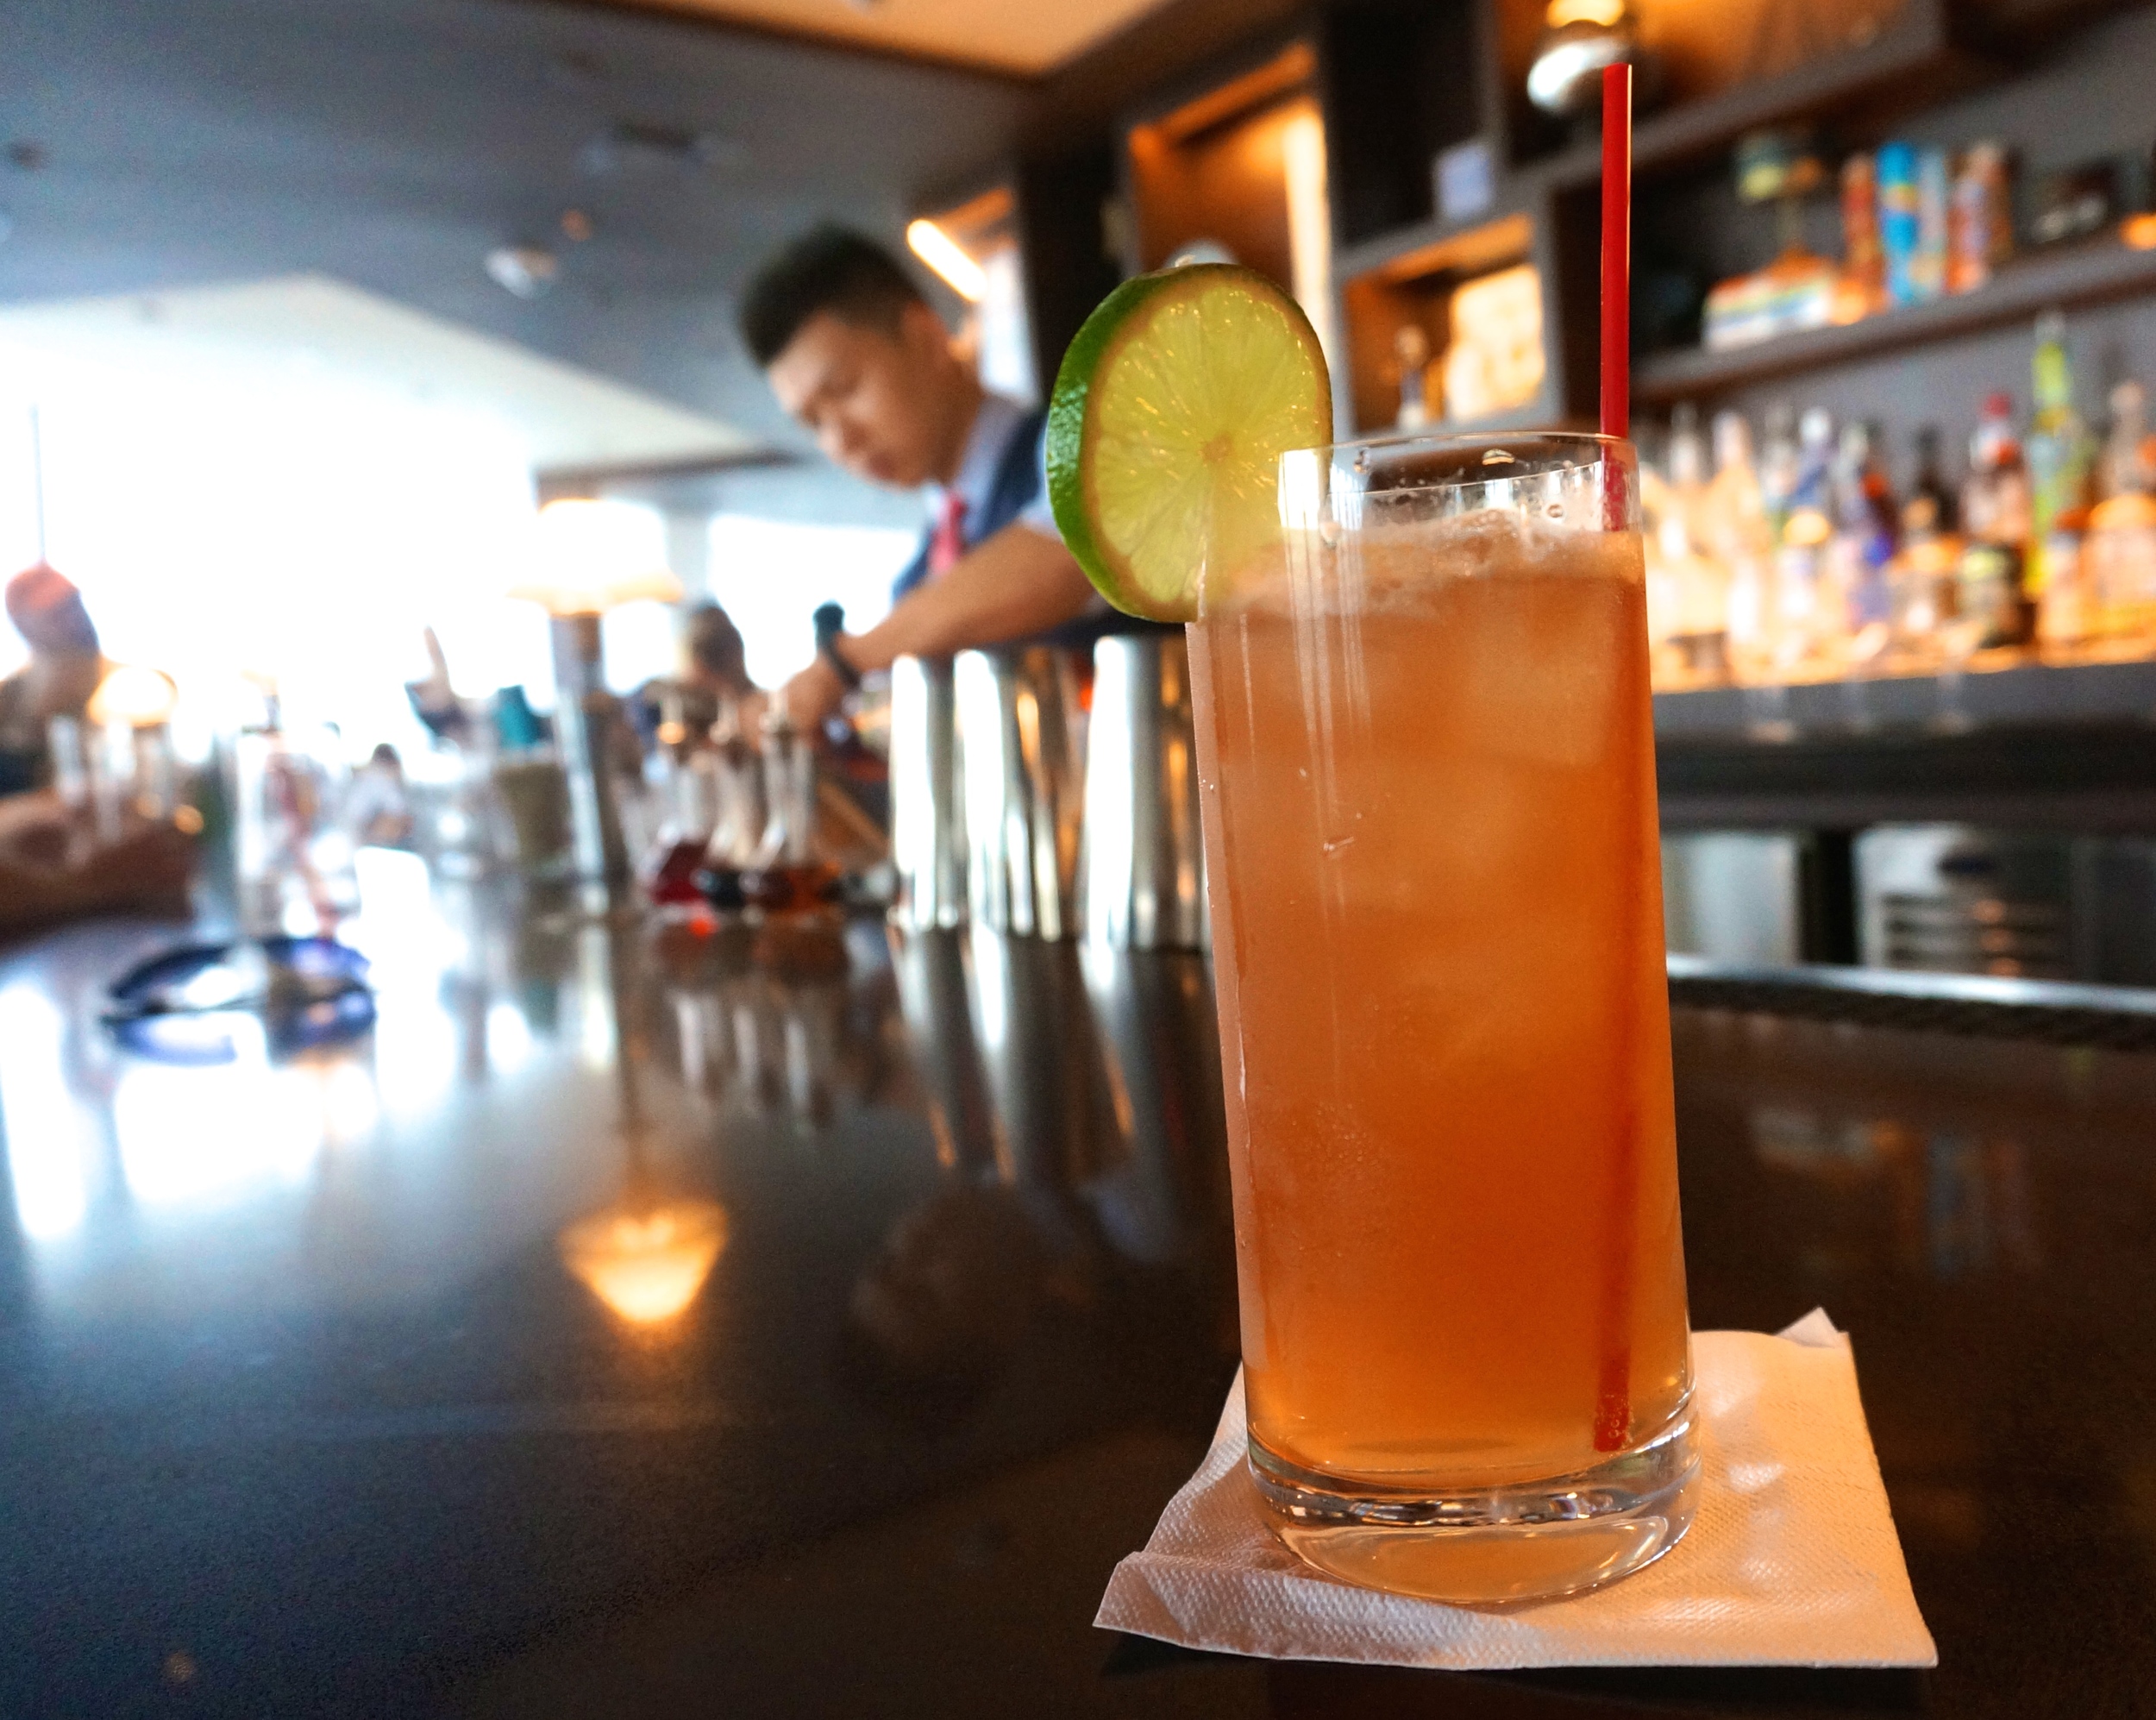 One Mix at One World Trade Center: Bring home a Signature Cocktail from the Highest Bar in the Western Hemisphere